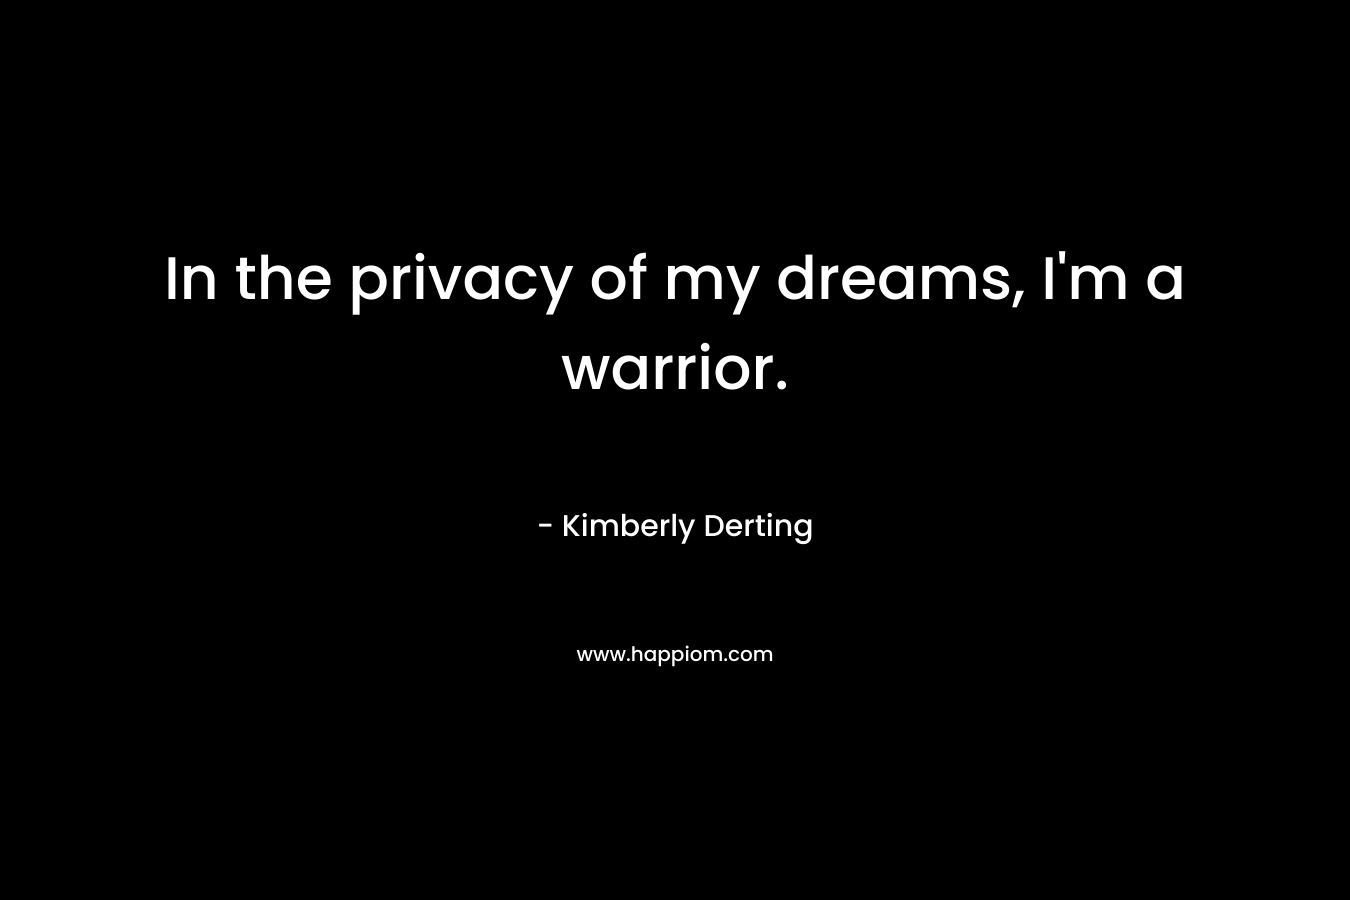 In the privacy of my dreams, I’m a warrior. – Kimberly Derting